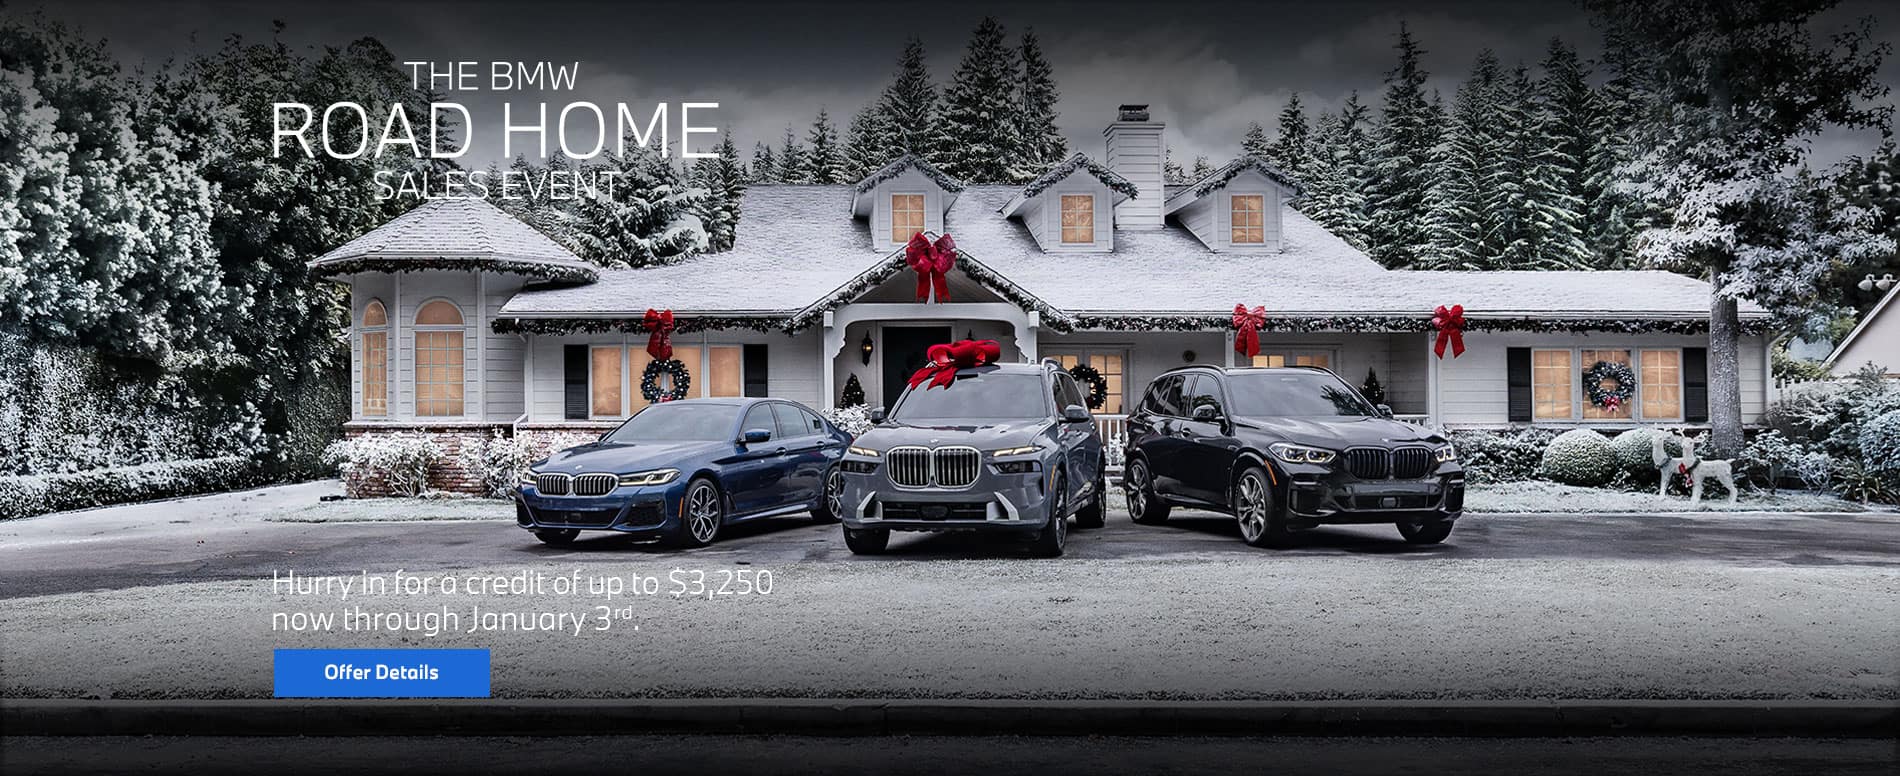 Receive a credit of up to $3,250 on select models now through January 3rd.